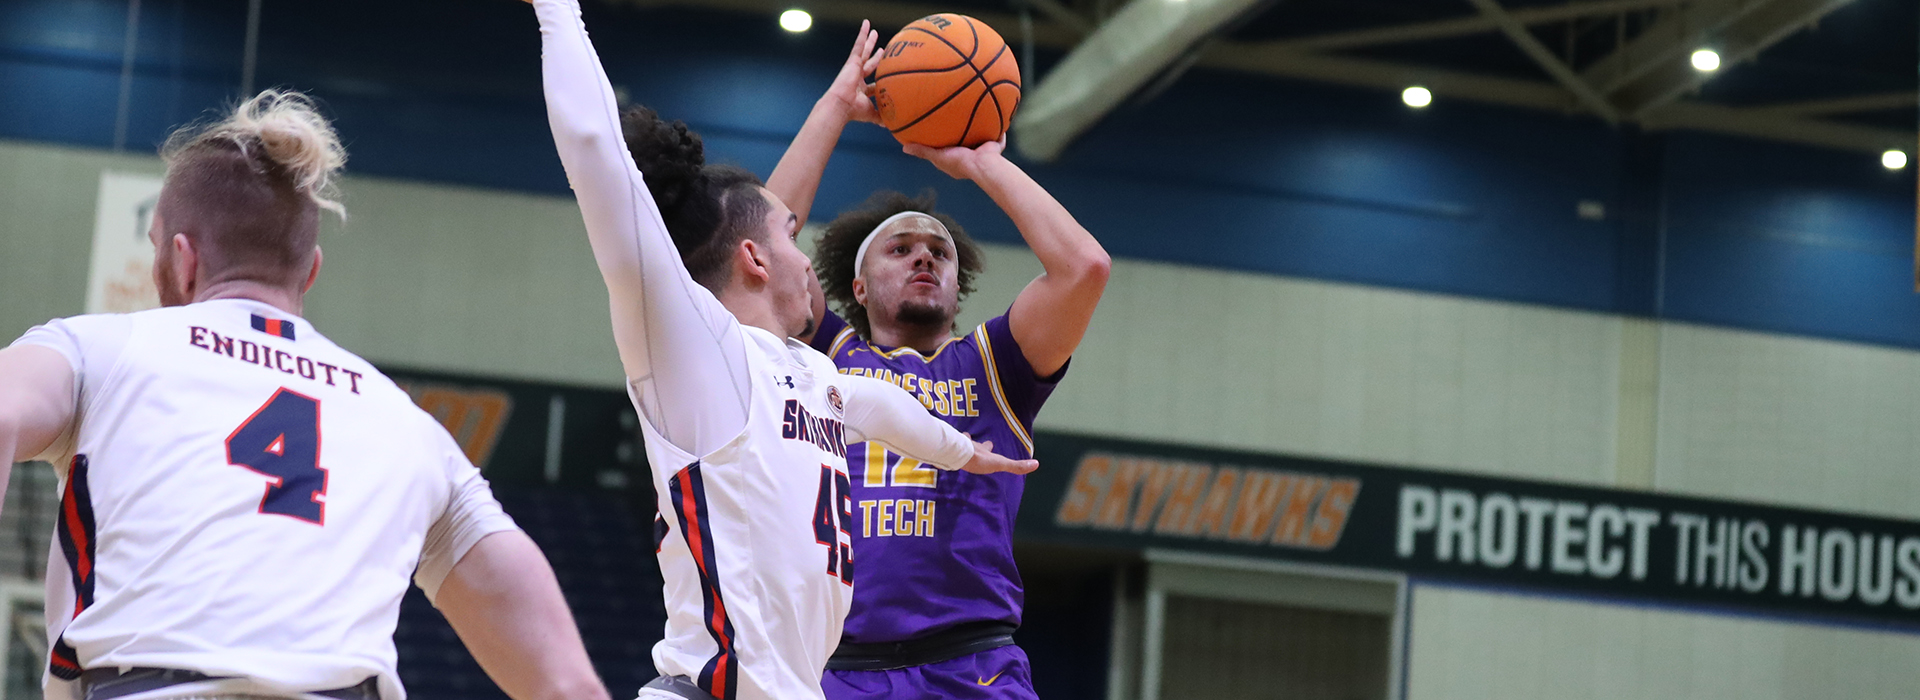 Golden Eagles take on long-time OVC rival Morehead State Thursday in the Hoop